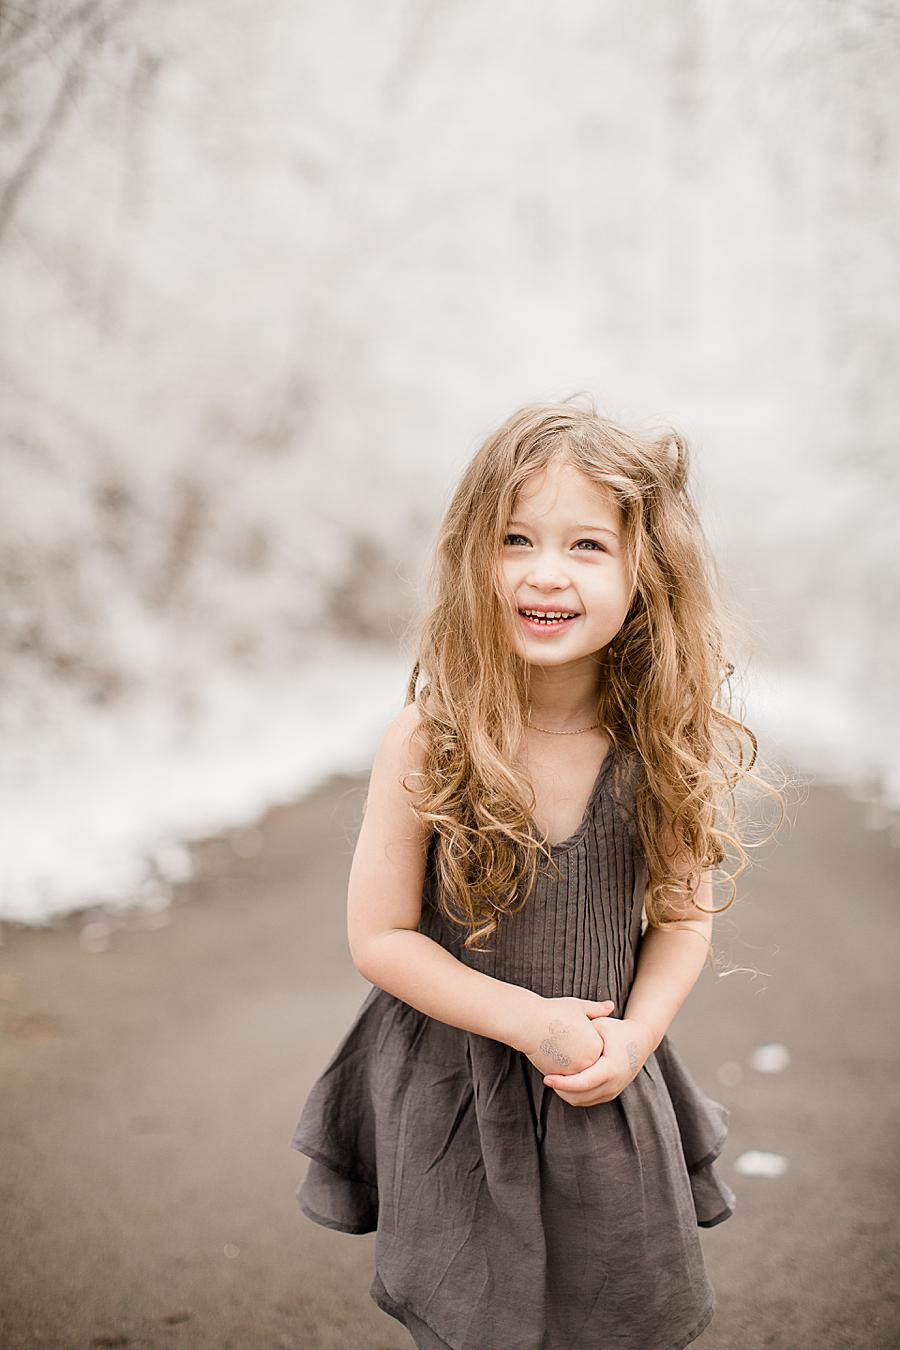 Toddler dress at this Knoxville Lifestyle by Knoxville Wedding Photographer, Amanda May Photos.